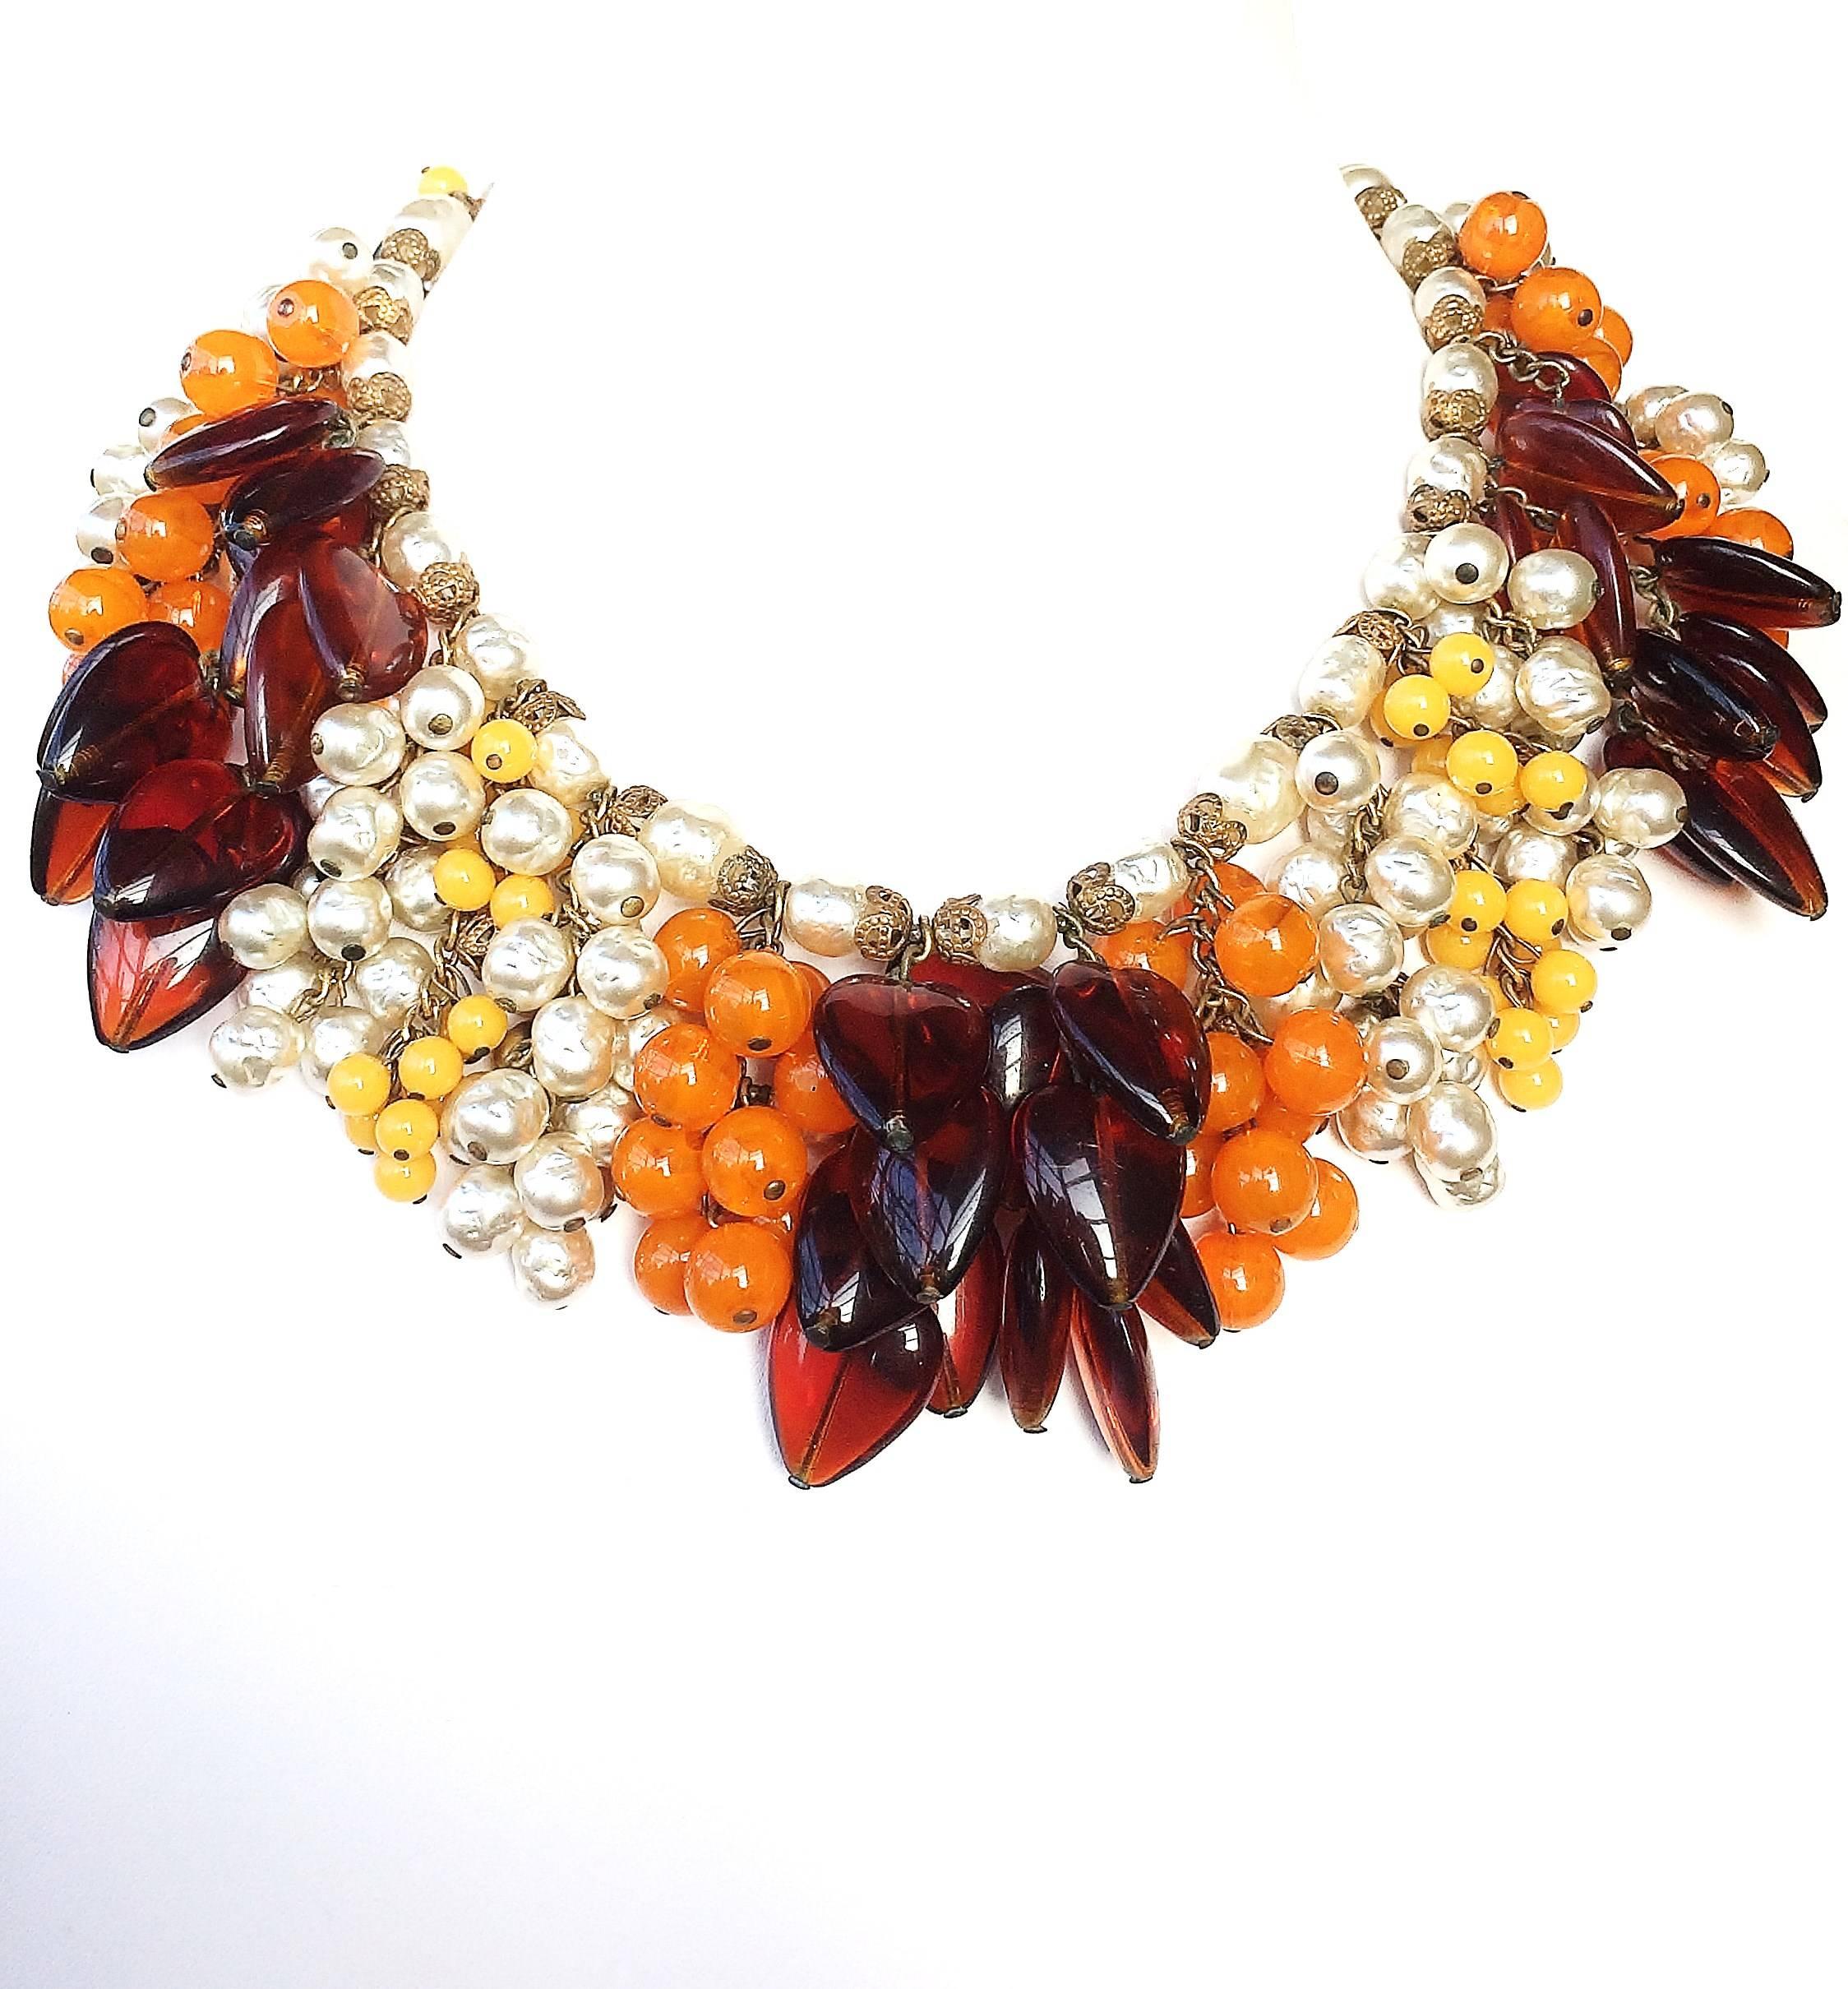 A magnificent necklace and earrings, highly impressive and sumptuous, designed by Robert Clark for Miriam Haskell, made of signature baroque pearls and glass 'leaf' drops and glass beads, in orange, yellow and a rich brown, some opaque, some clear